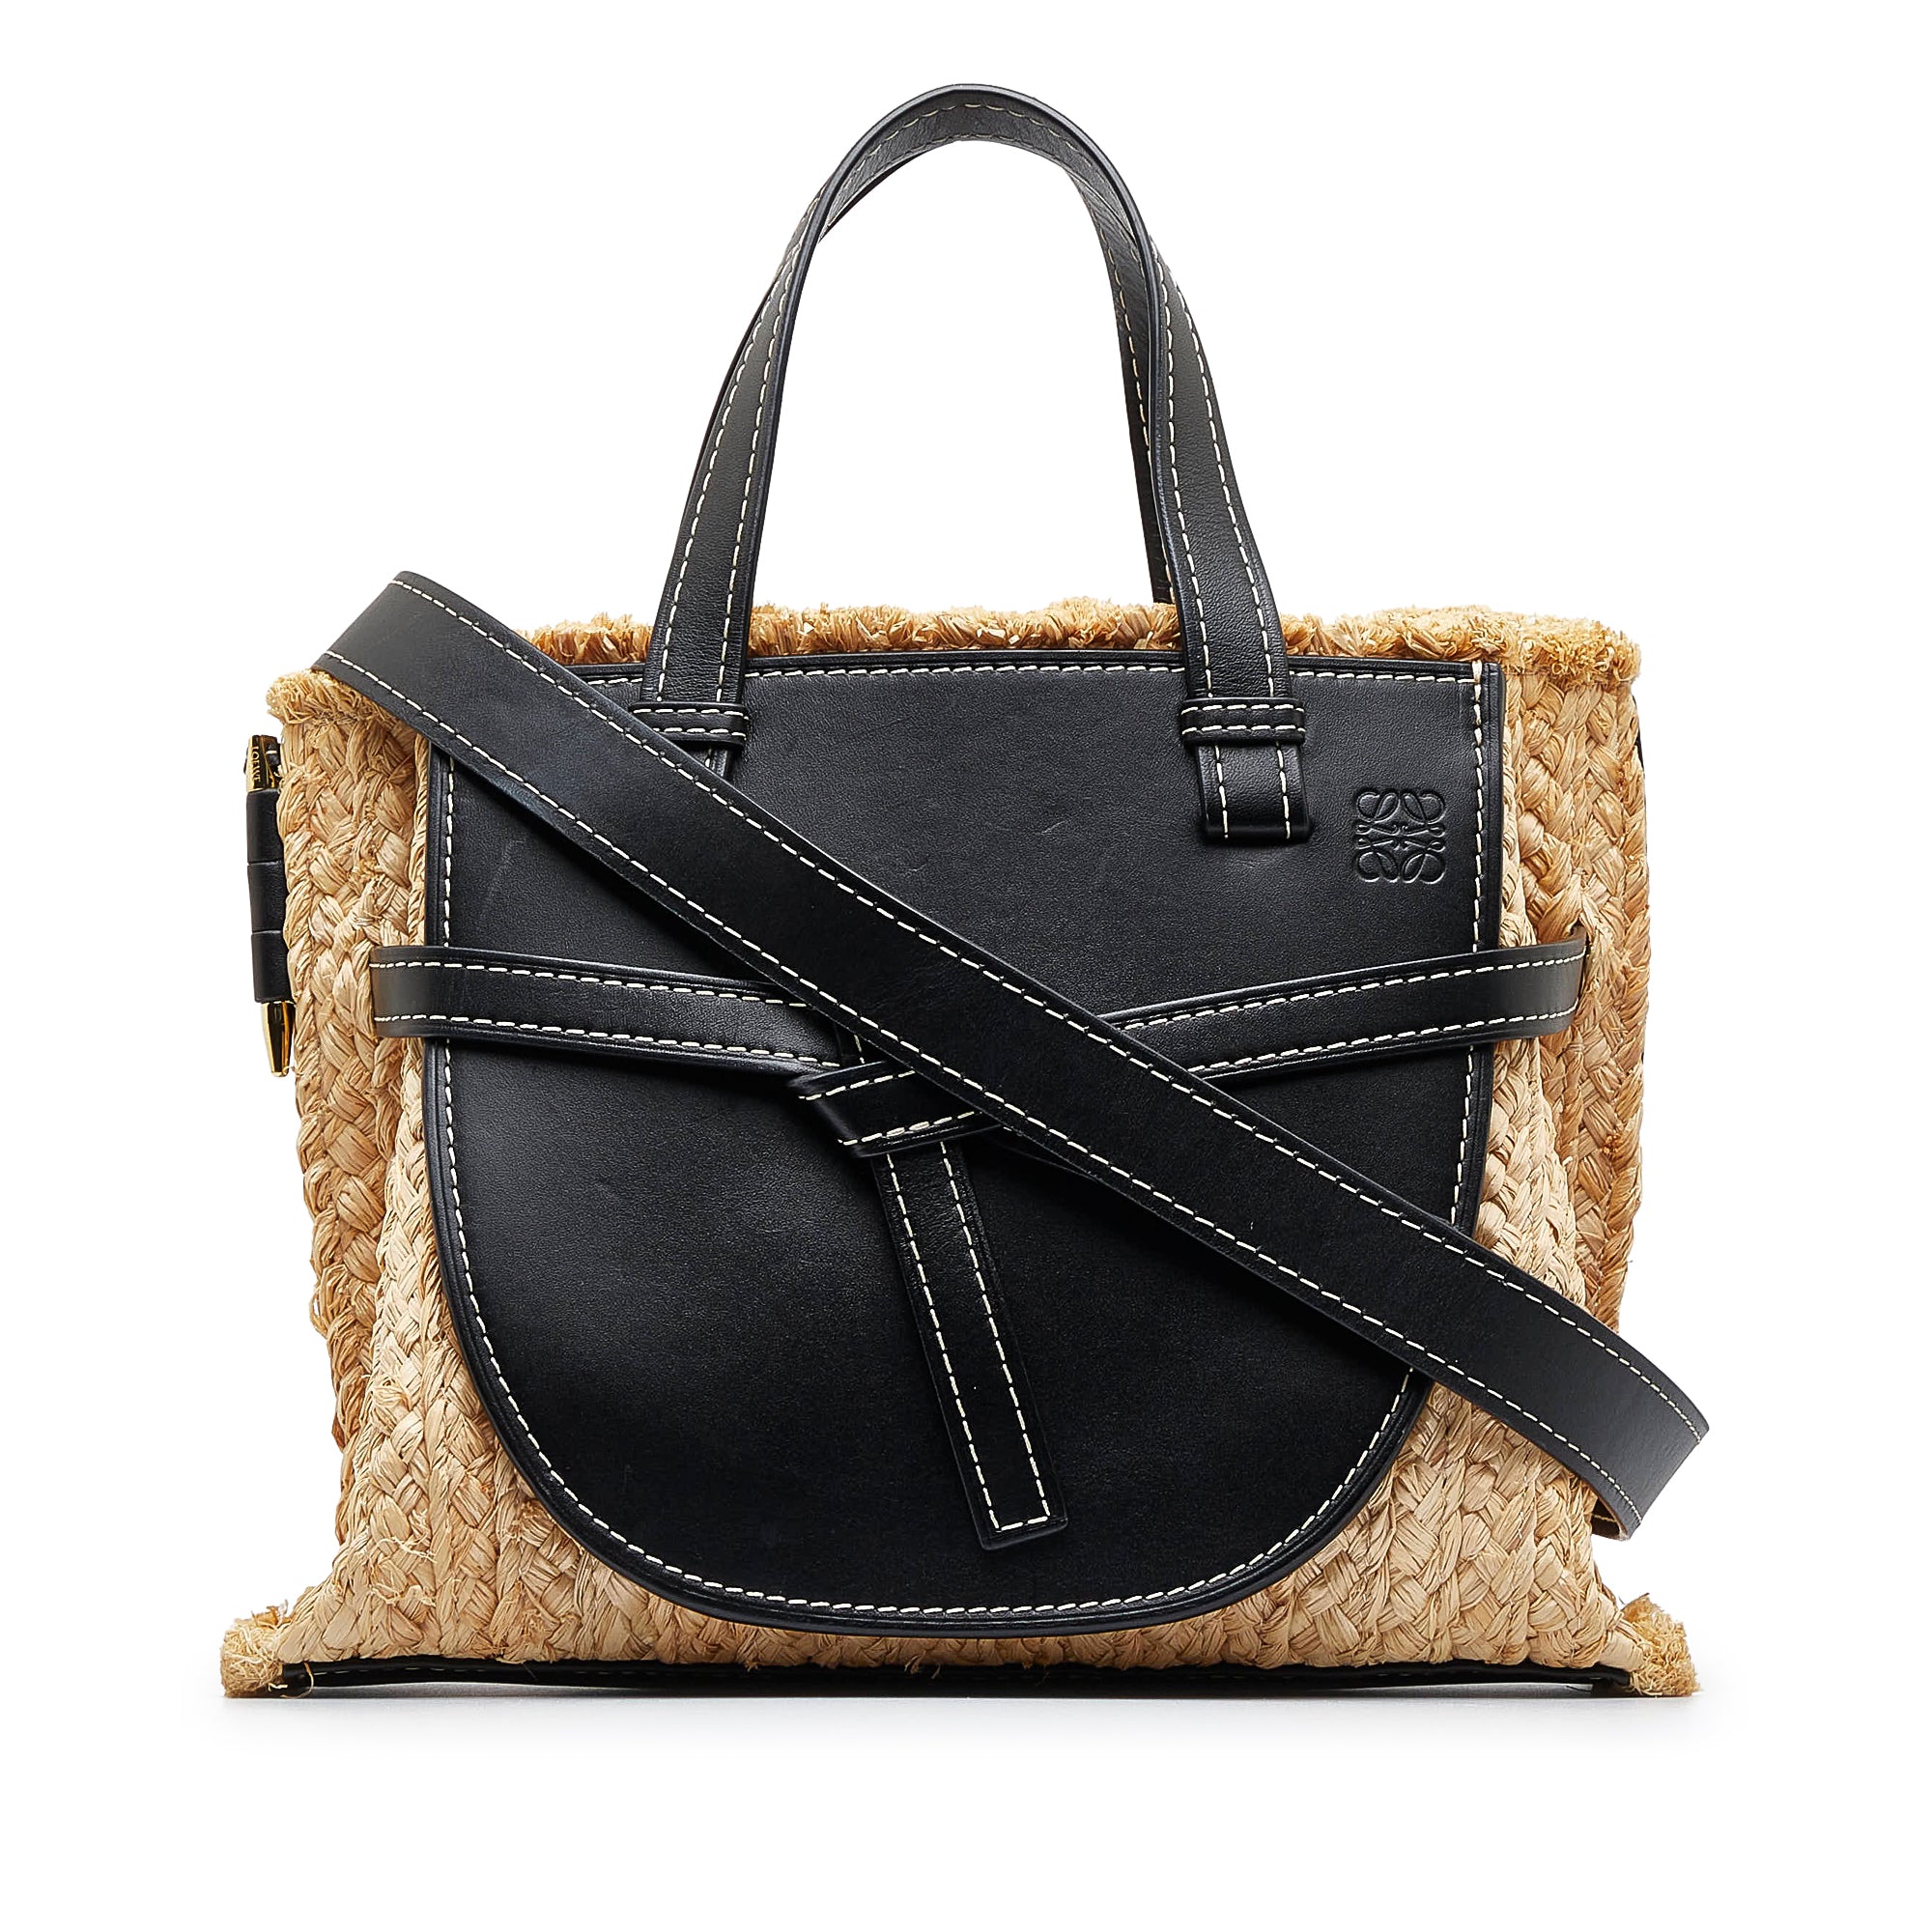 LOEWE on X: Introducing the Gate Pocket, the latest member of